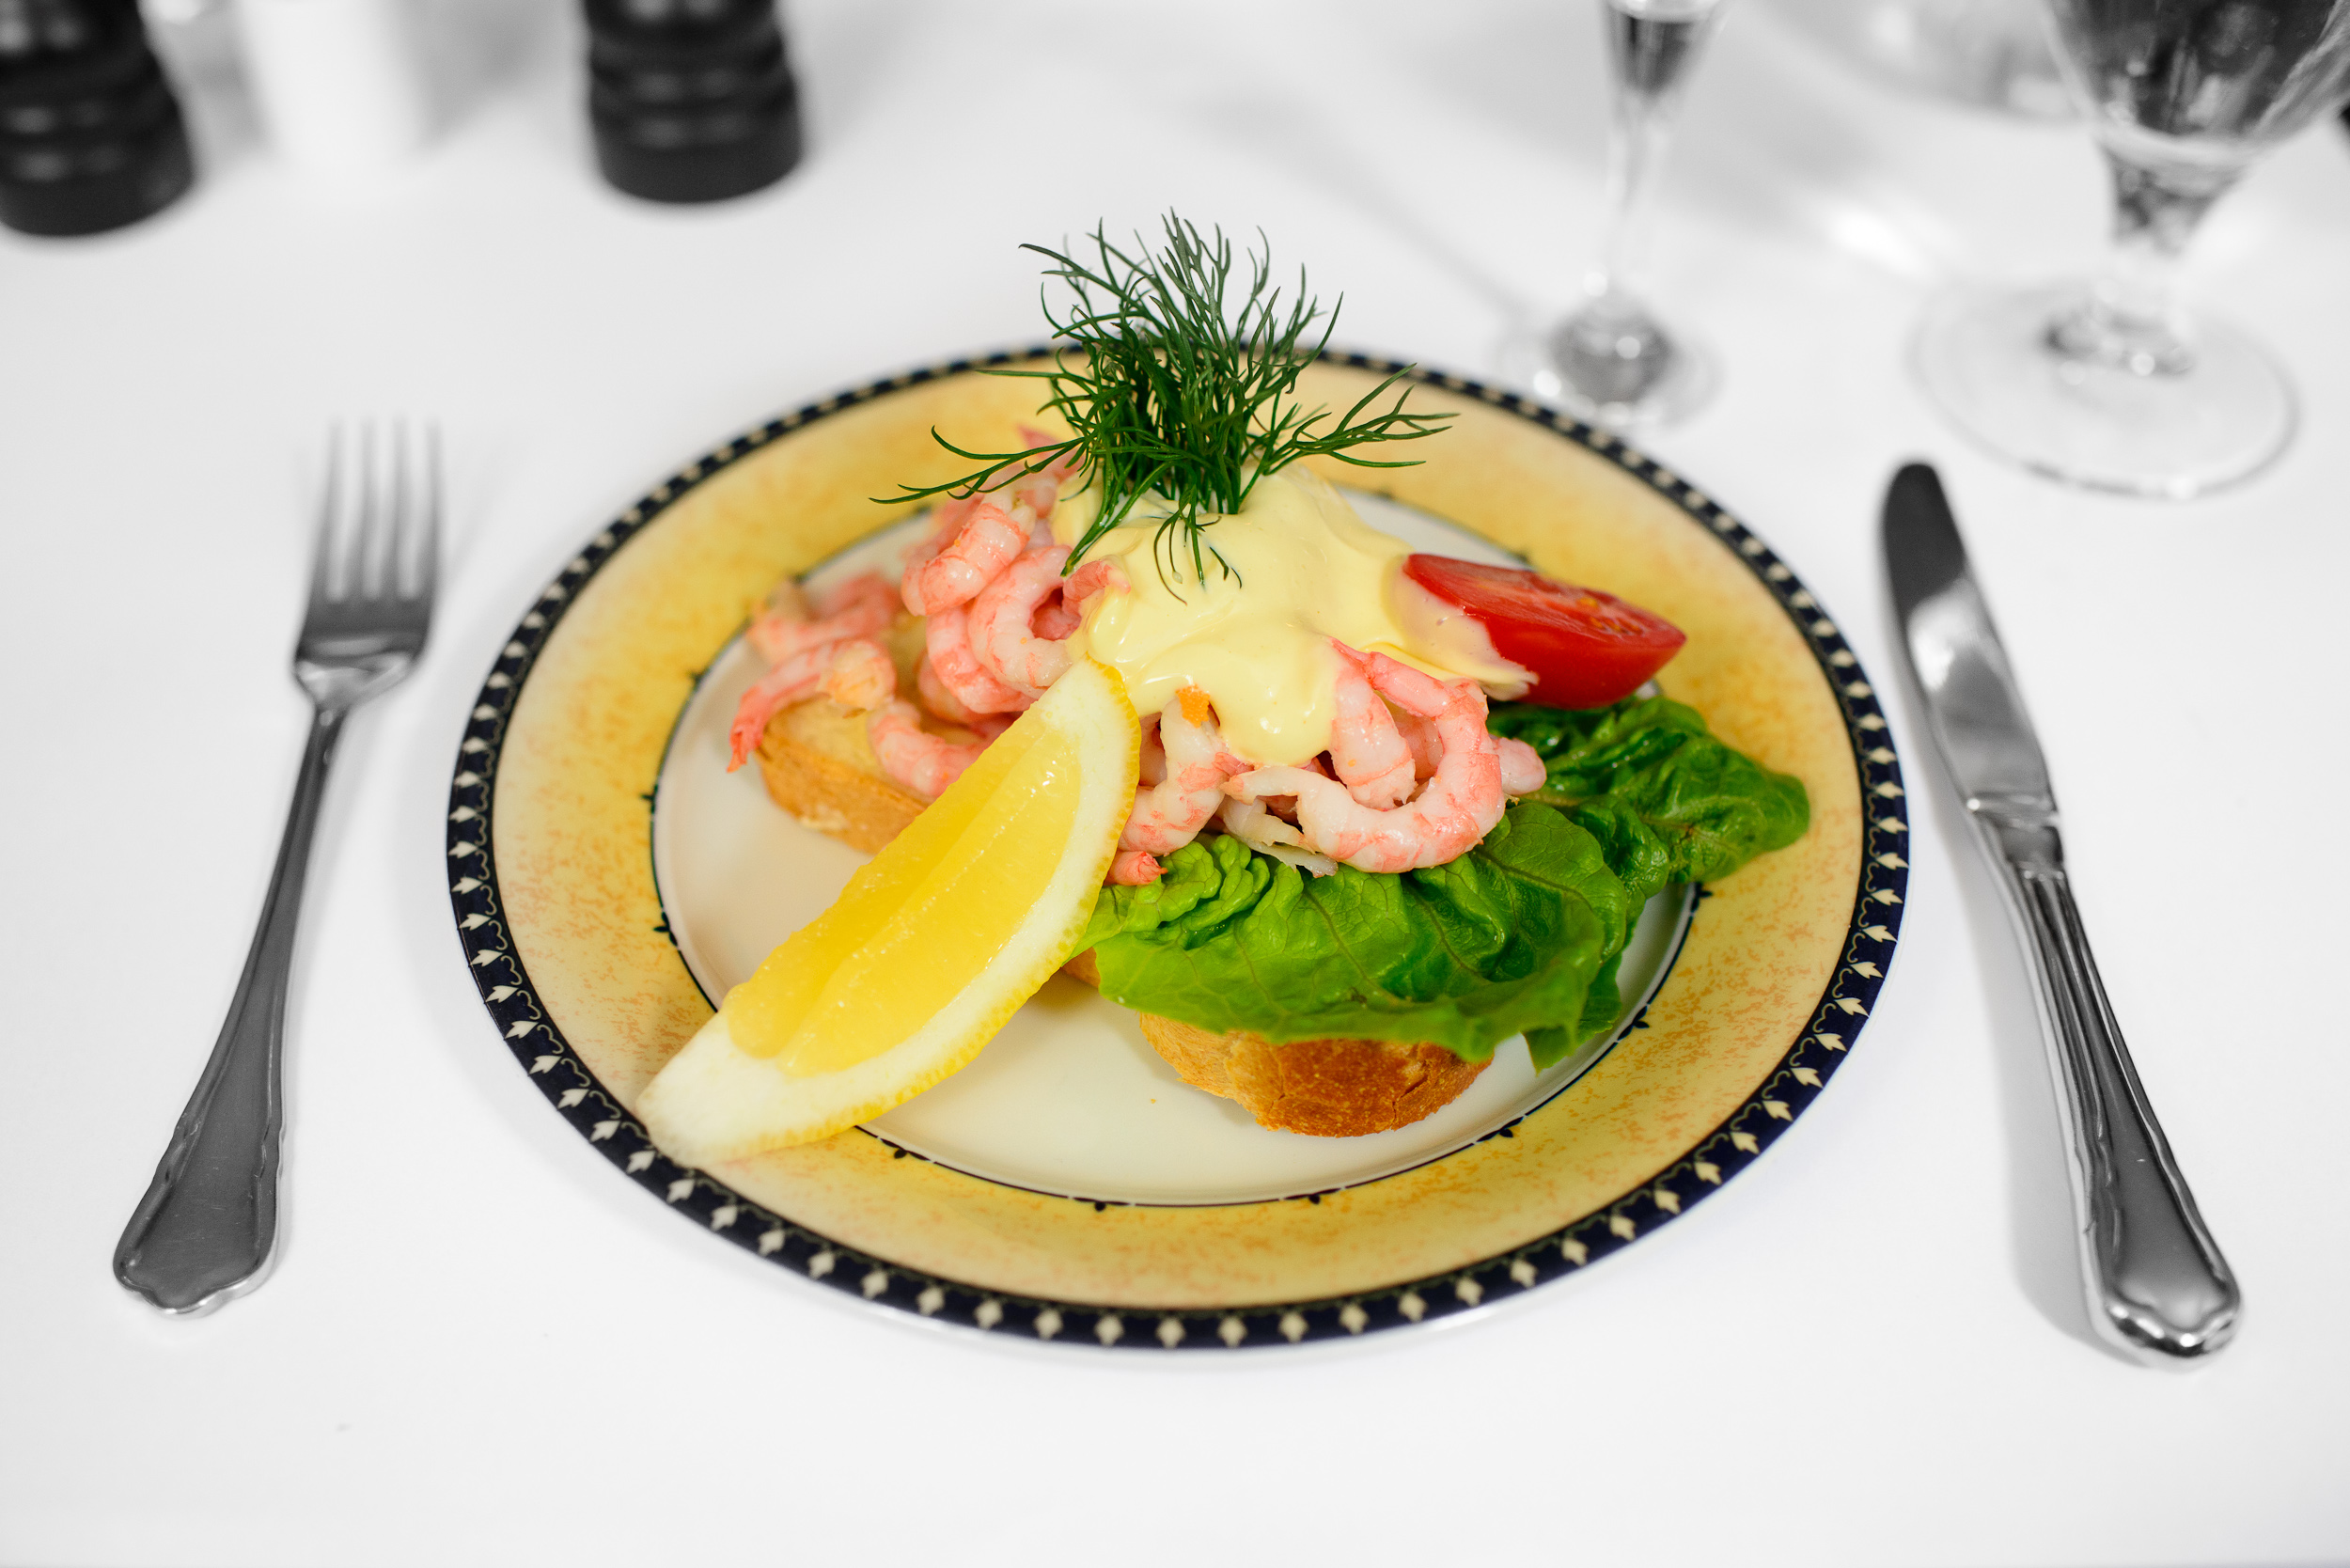 Hand-shelled shrimps from Greenland, mayonnaise and lemon